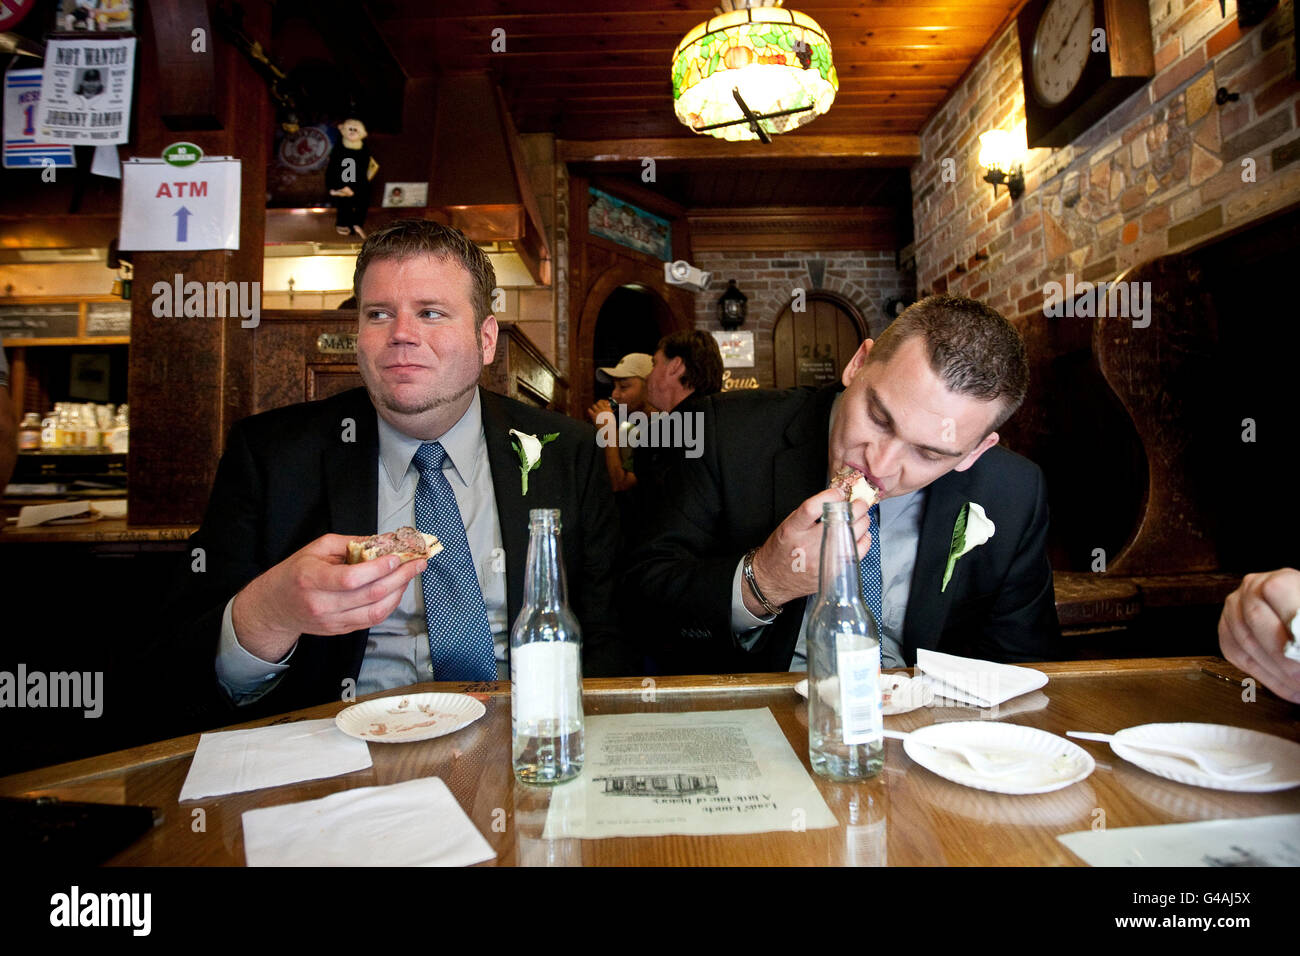 Just married, John Odum (L) and Dustin Endicott, from Birmingham, AL, eat hamburgers at Louis' Lunch in New Haven, 26 May 2009. Stock Photo